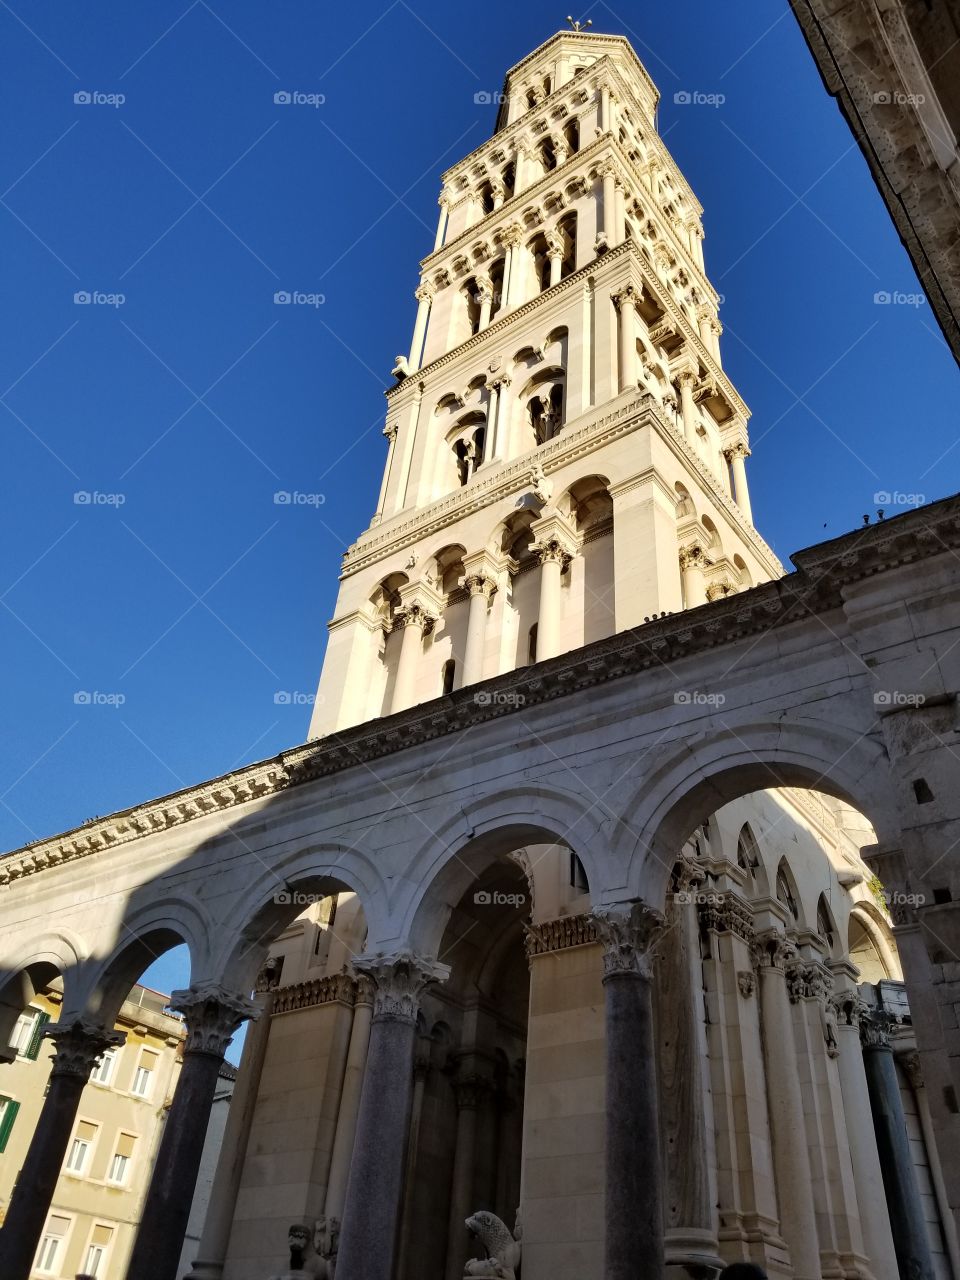 Diocletian Palace & Bell tower